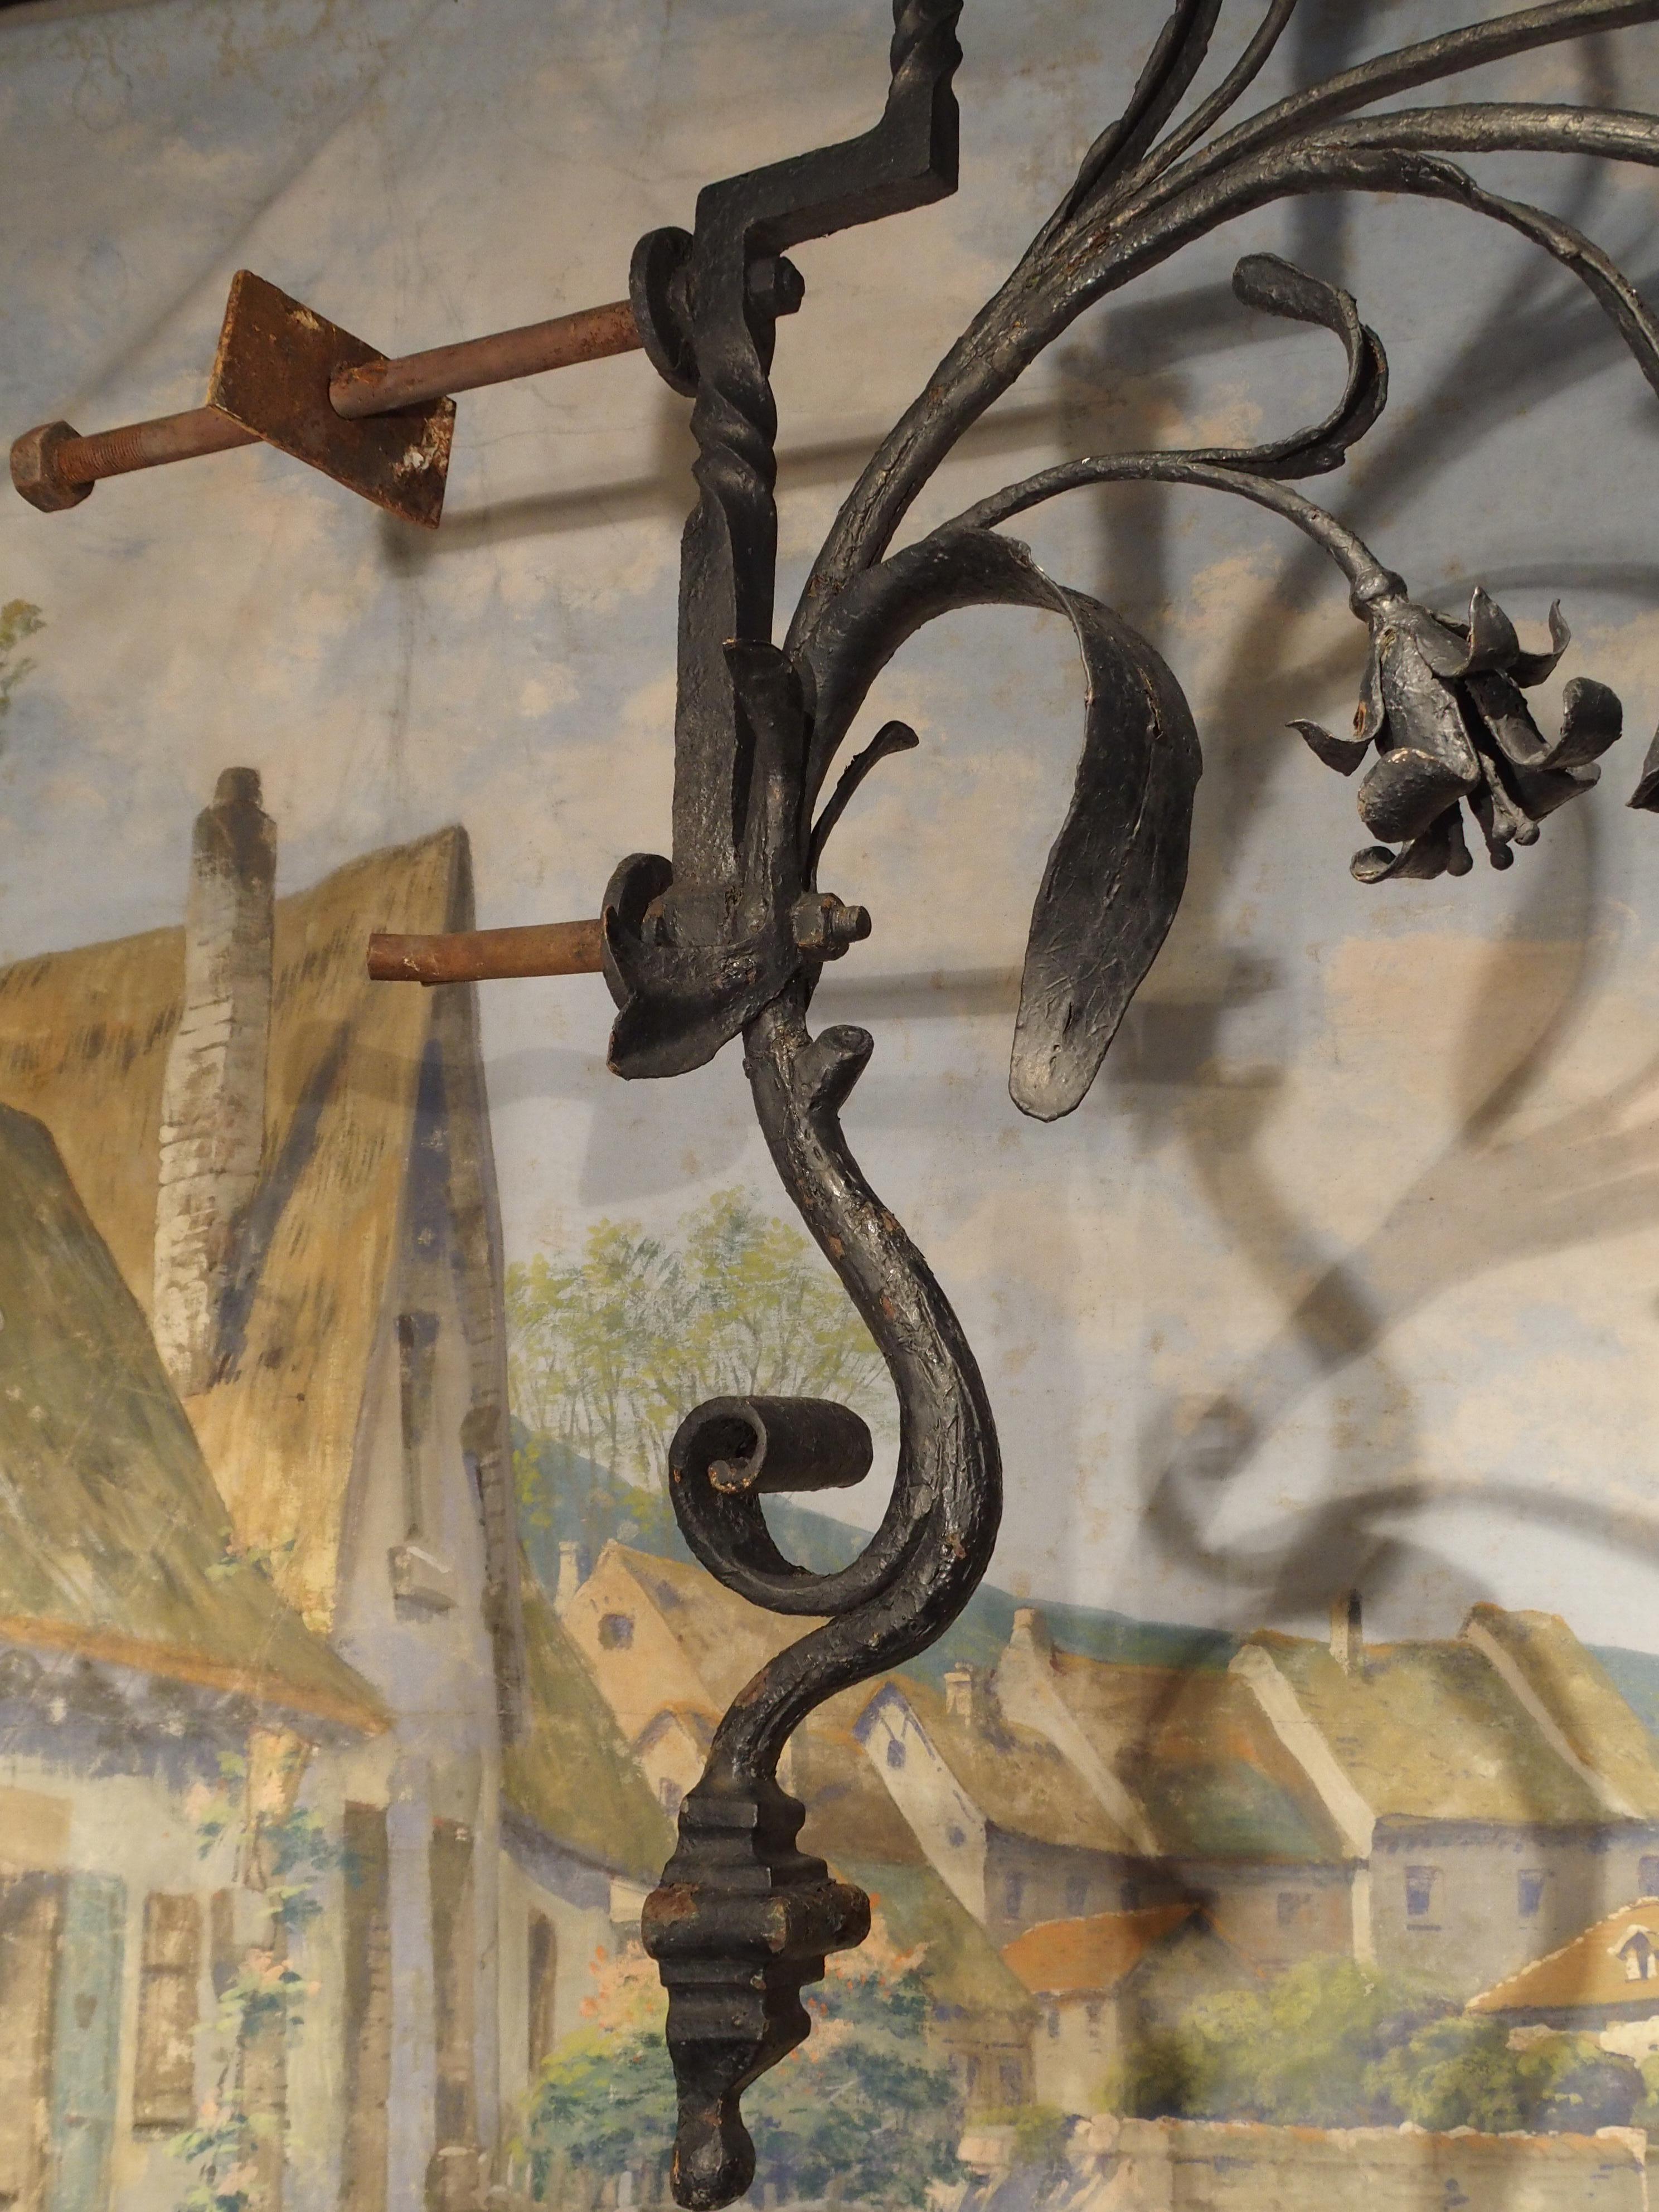 Belgian Massive circa 1700 Forged Iron Lantern Holder from a Castle in Wallonia Belgium